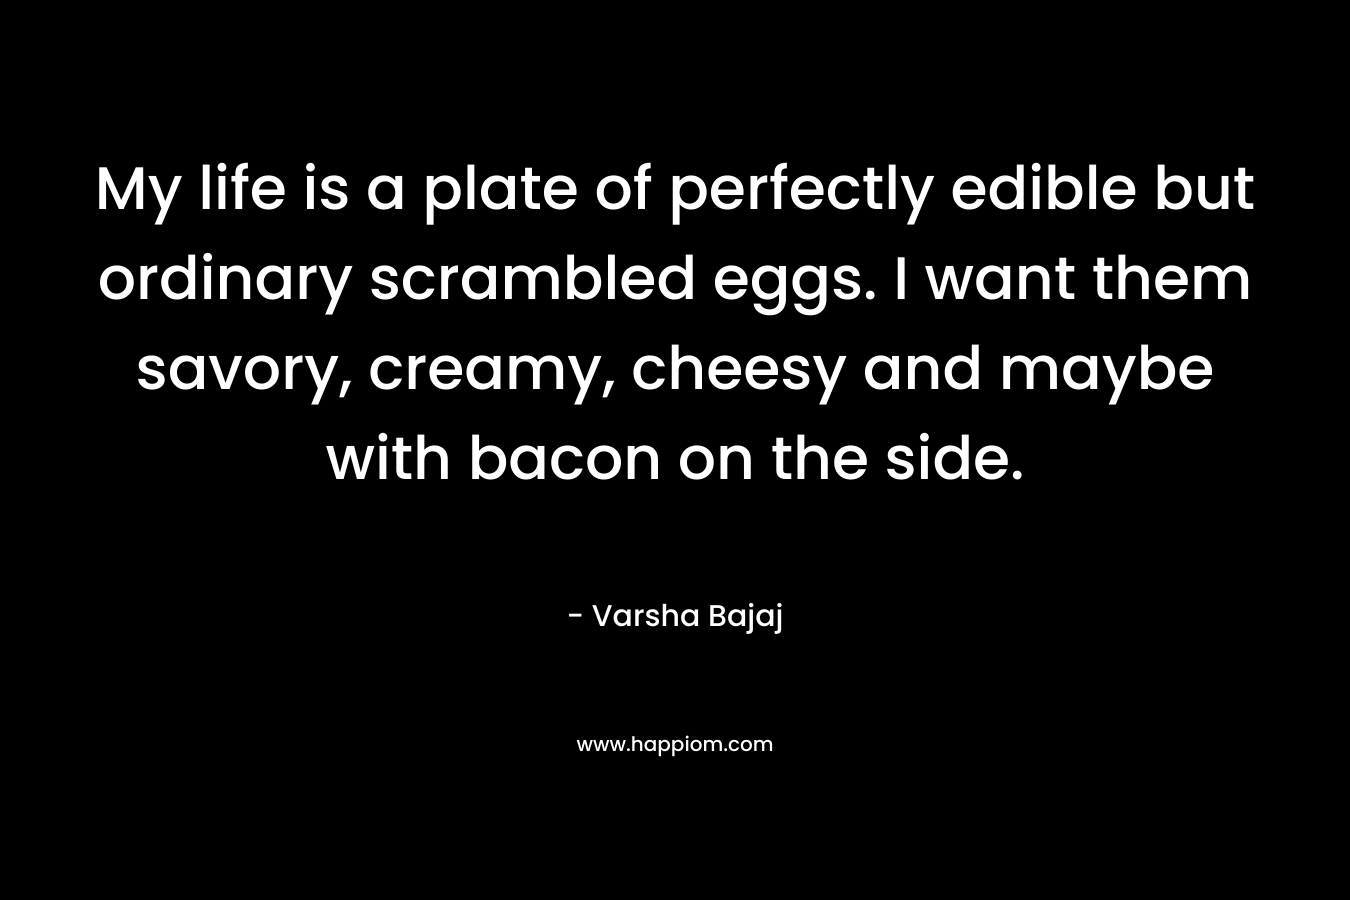 My life is a plate of perfectly edible but ordinary scrambled eggs. I want them savory, creamy, cheesy and maybe with bacon on the side. – Varsha Bajaj